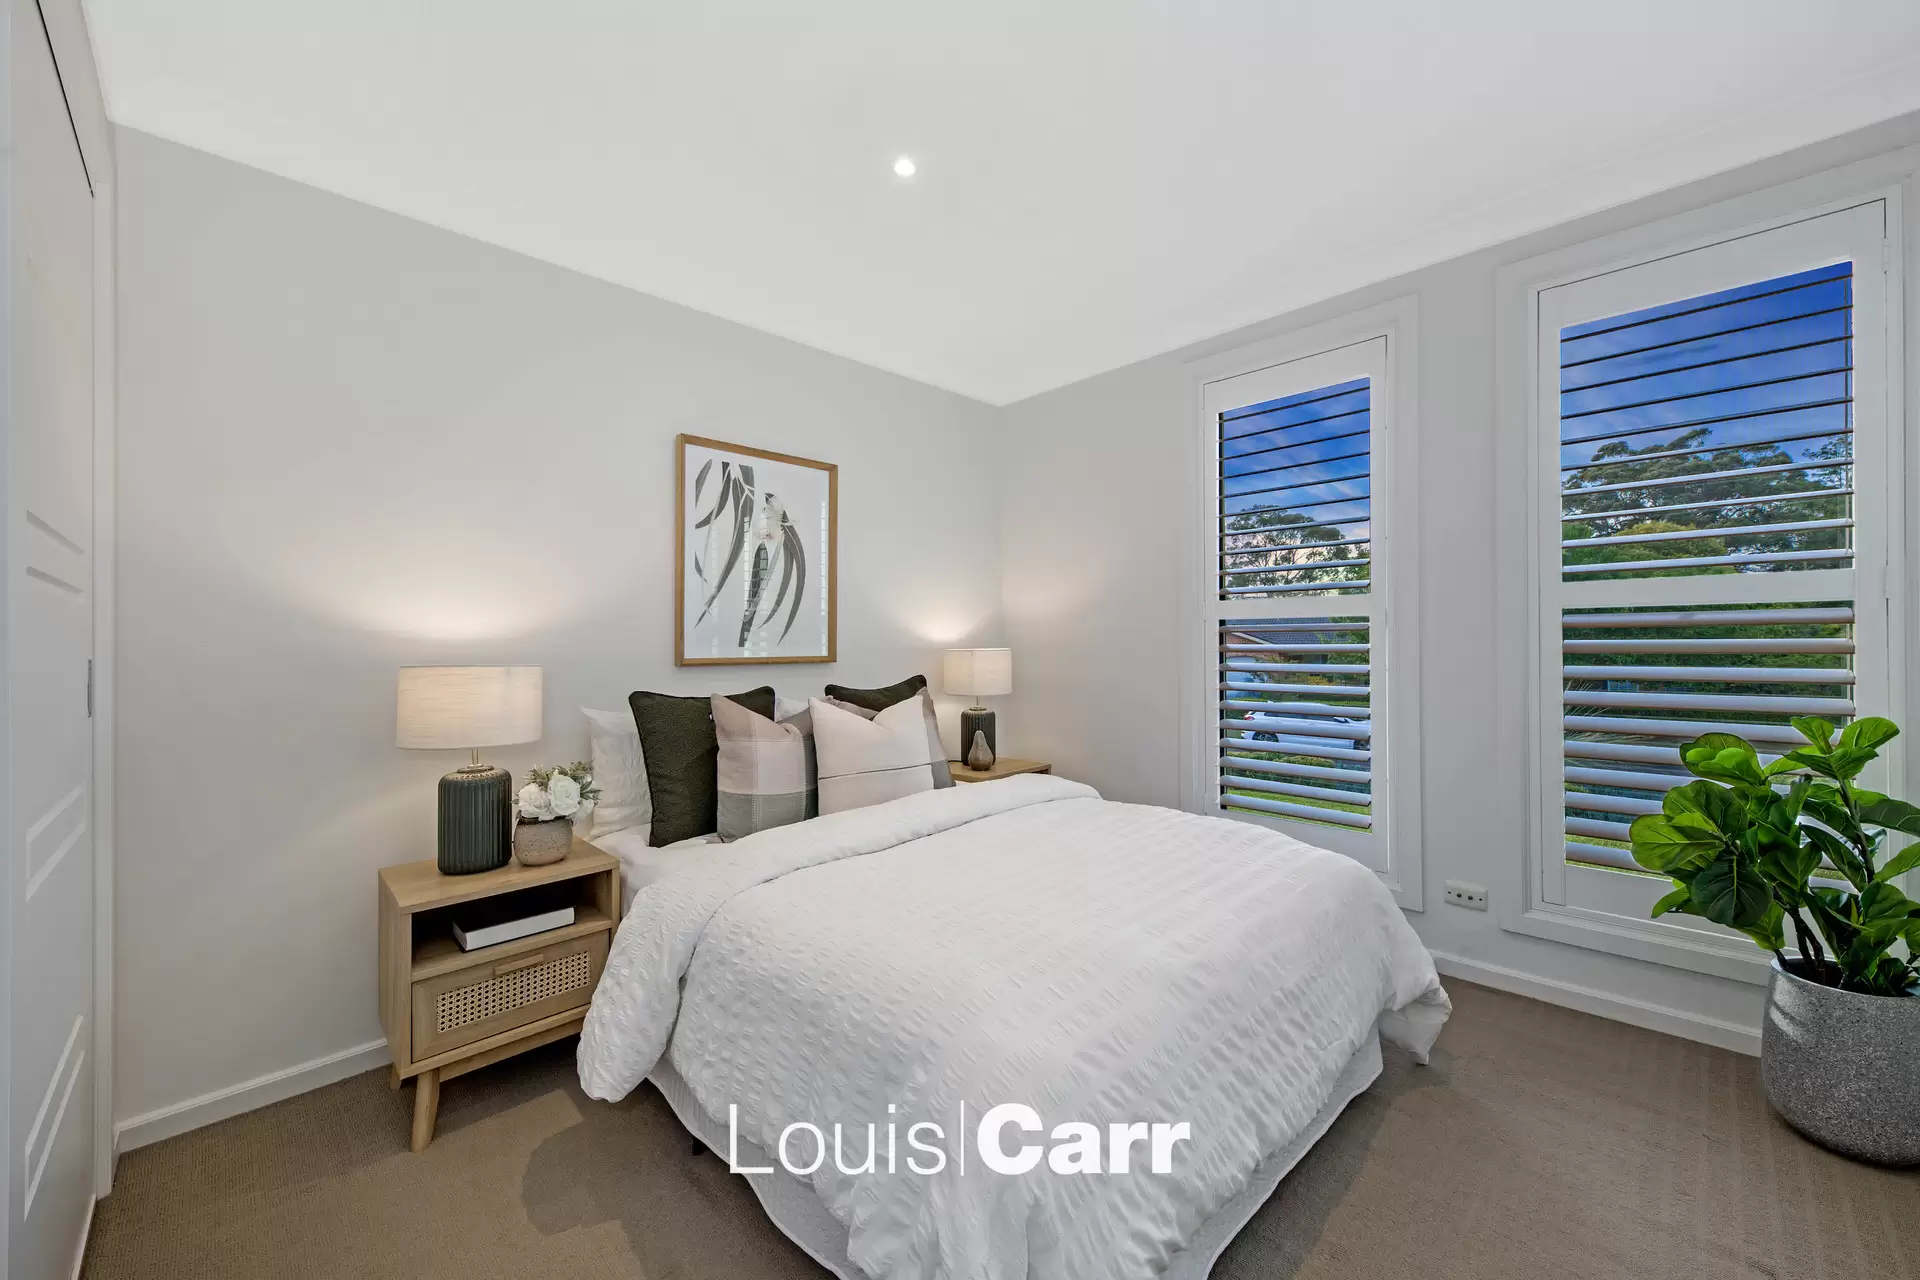 Photo #10: 18 Chiltern Crescent, Castle Hill - Sold by Louis Carr Real Estate